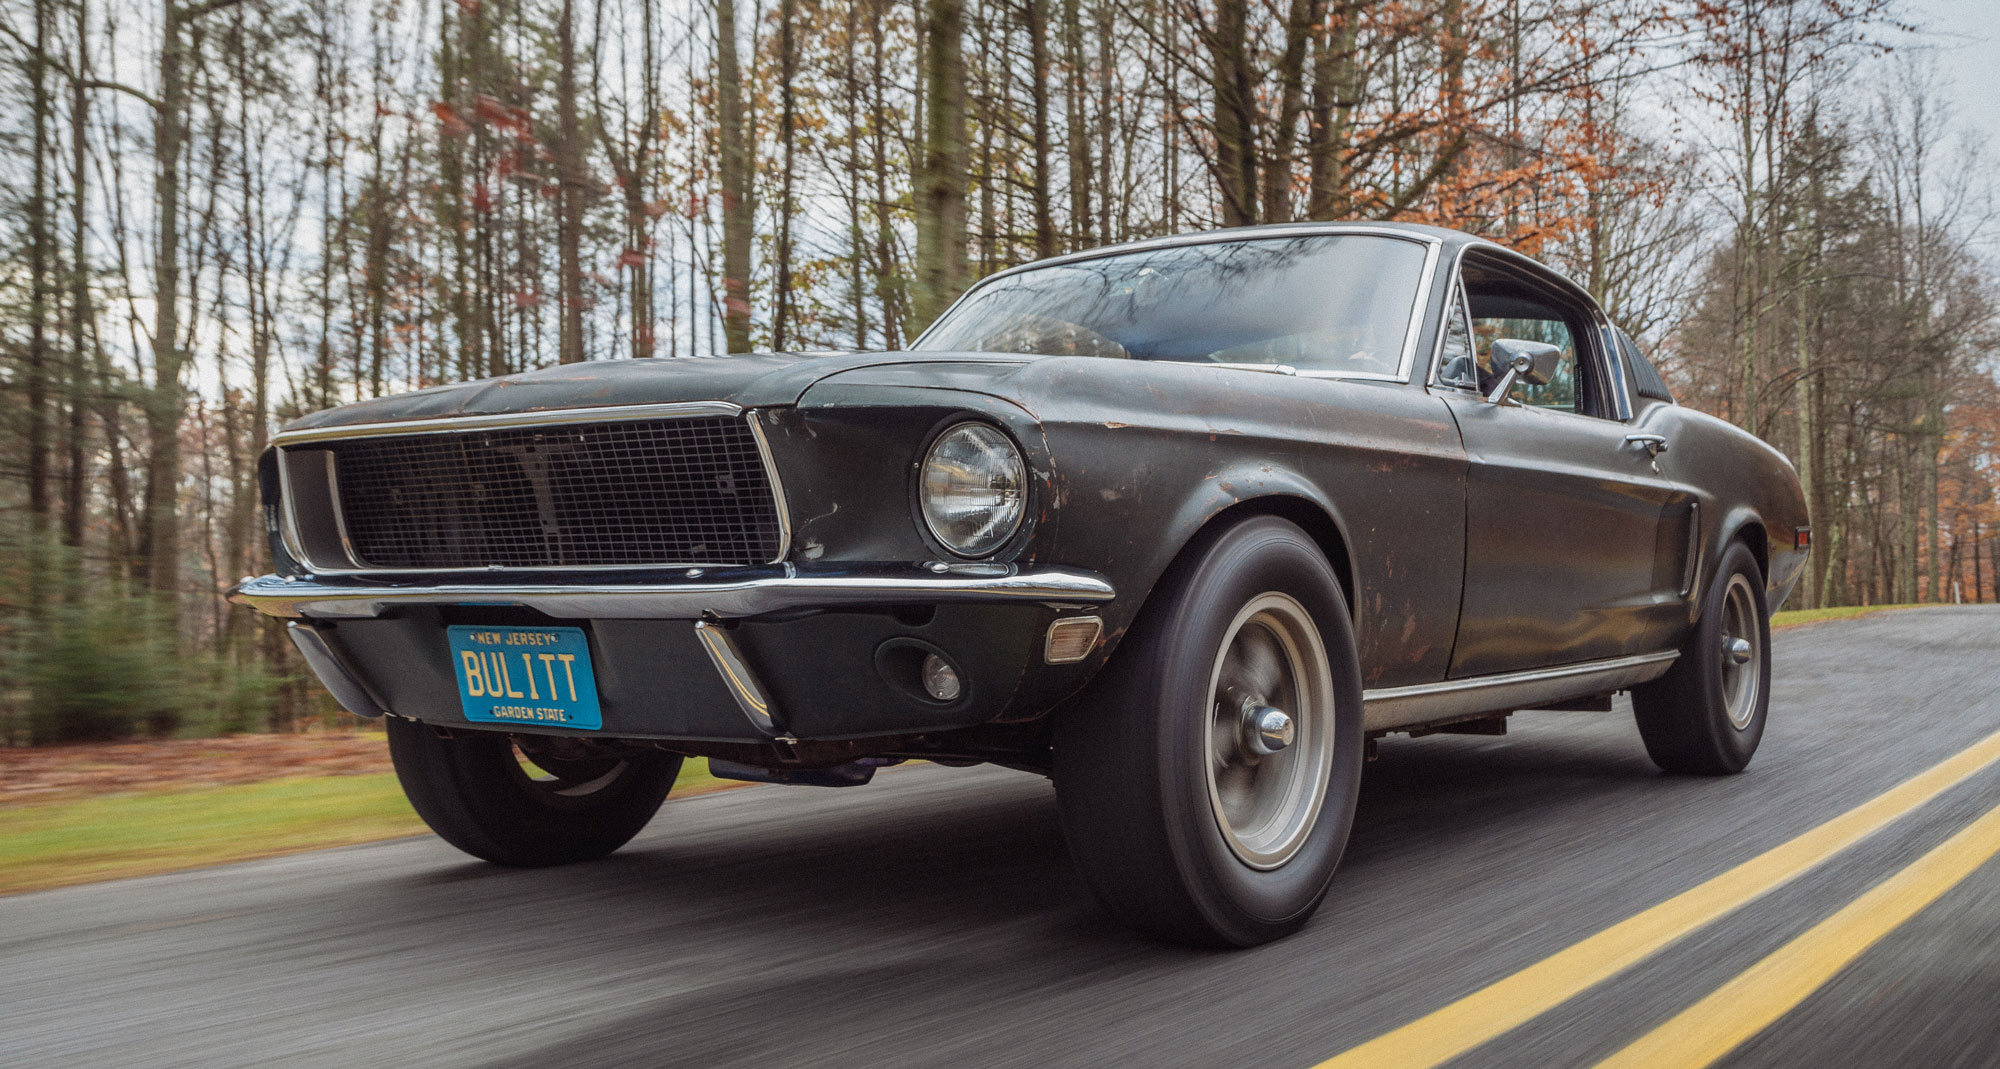 10 Things You Didn't Know About the Ford Mustang